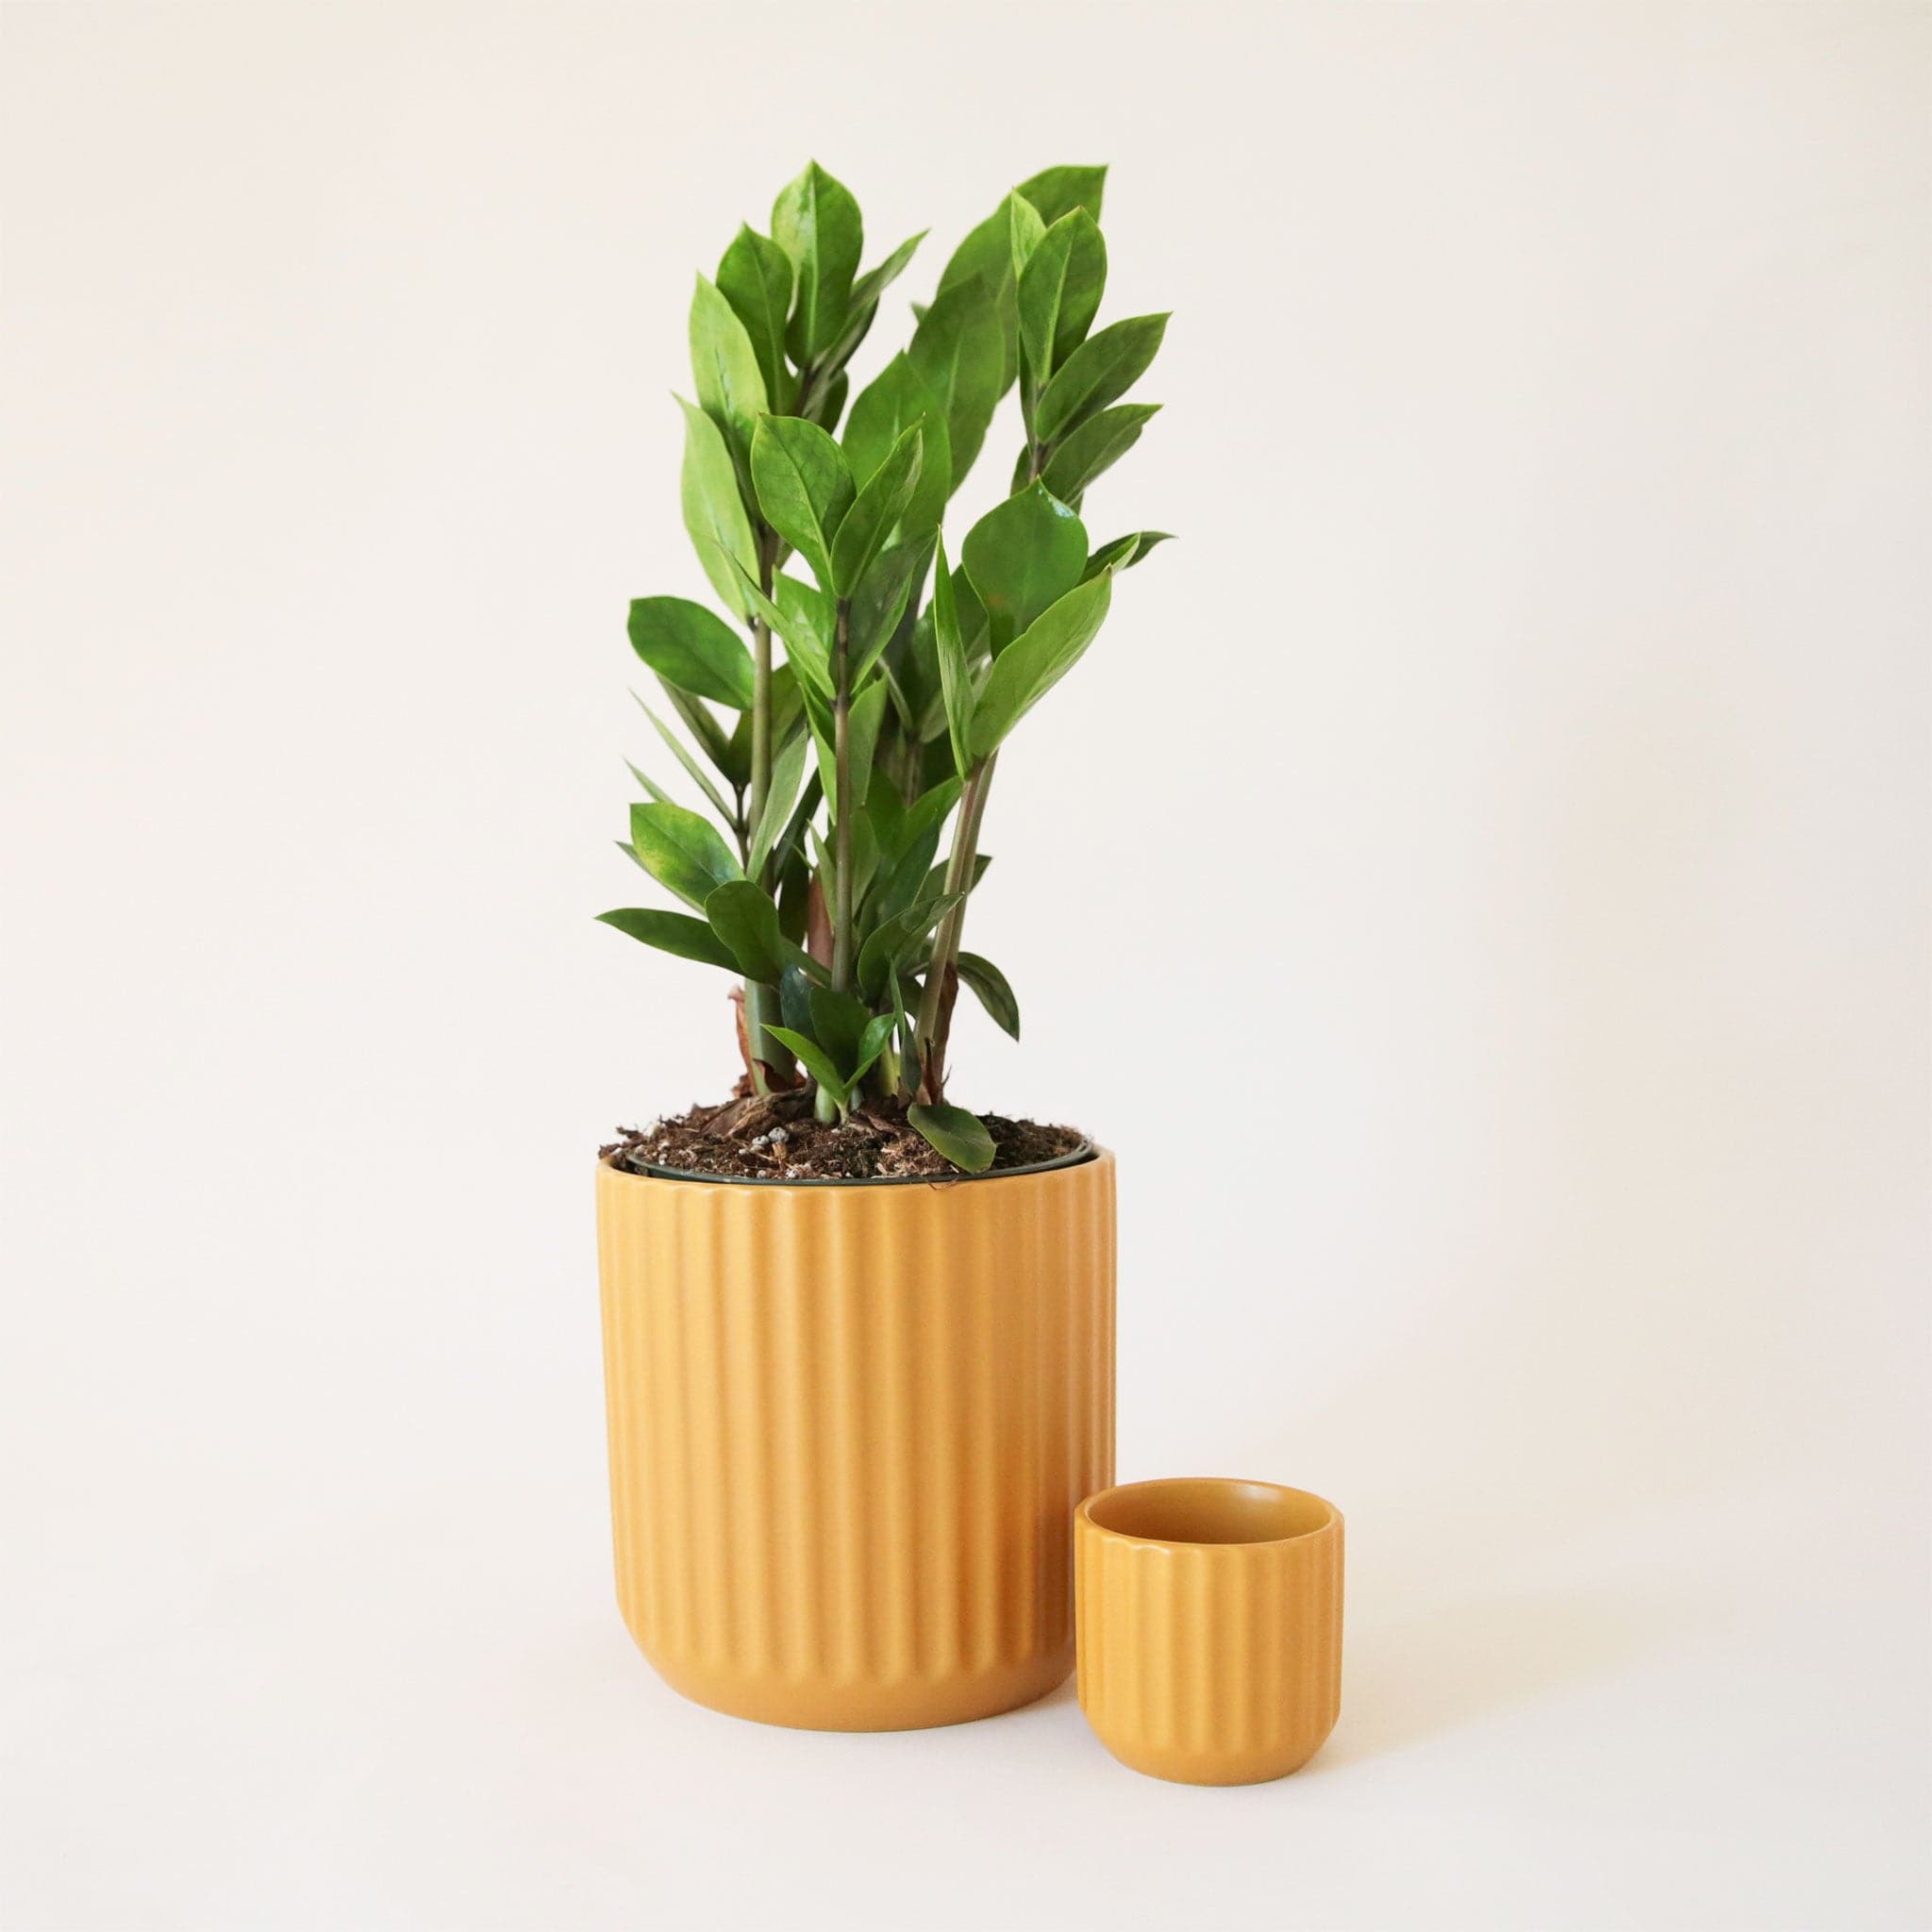 One large and one small honey colored pot with ribbed textured exterior. The larger of the two pots is filled with a tall leafy plant. 